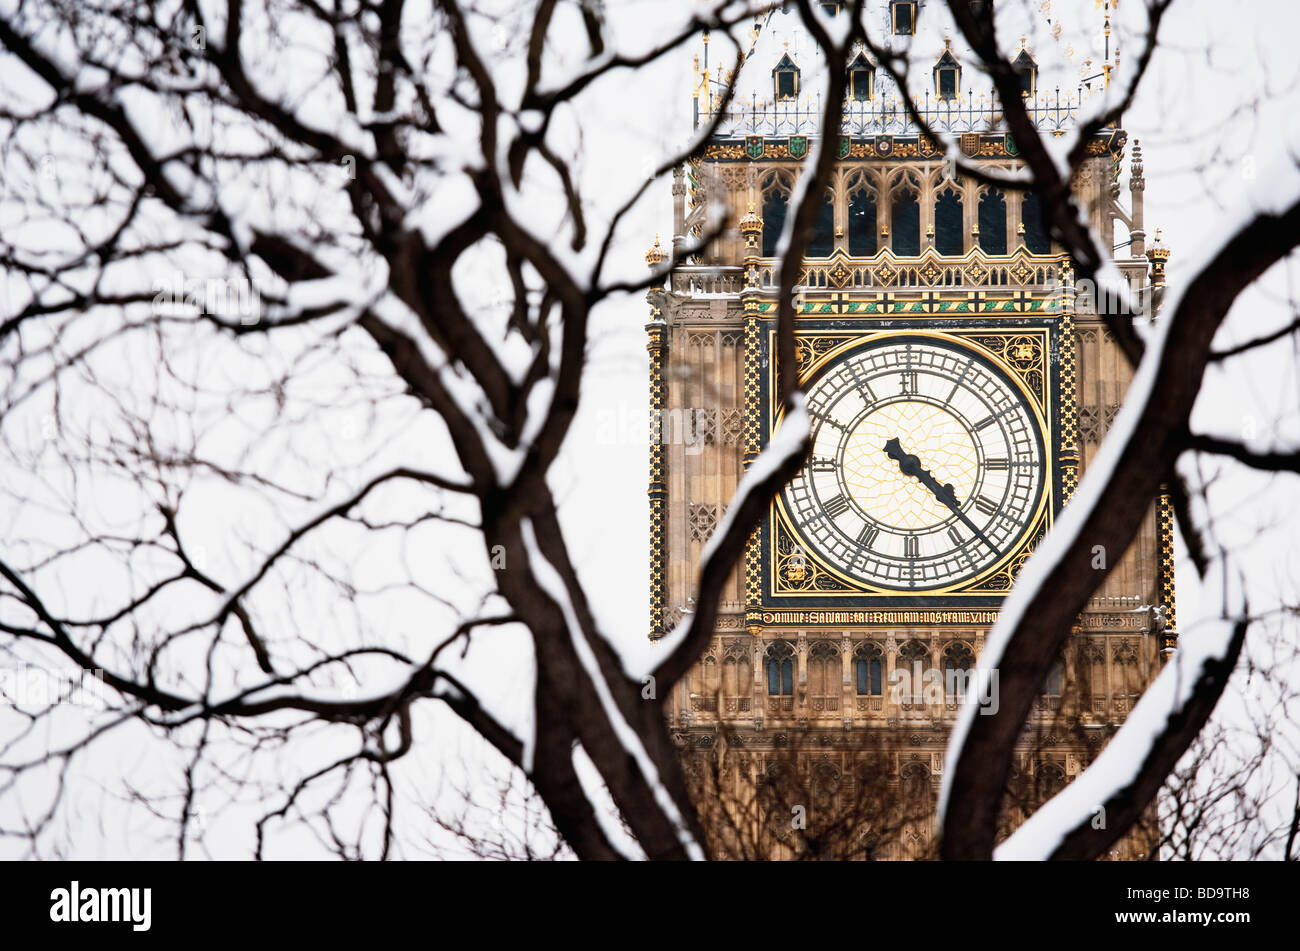 Snow on tree in front of Big Ben London England Stock Photo